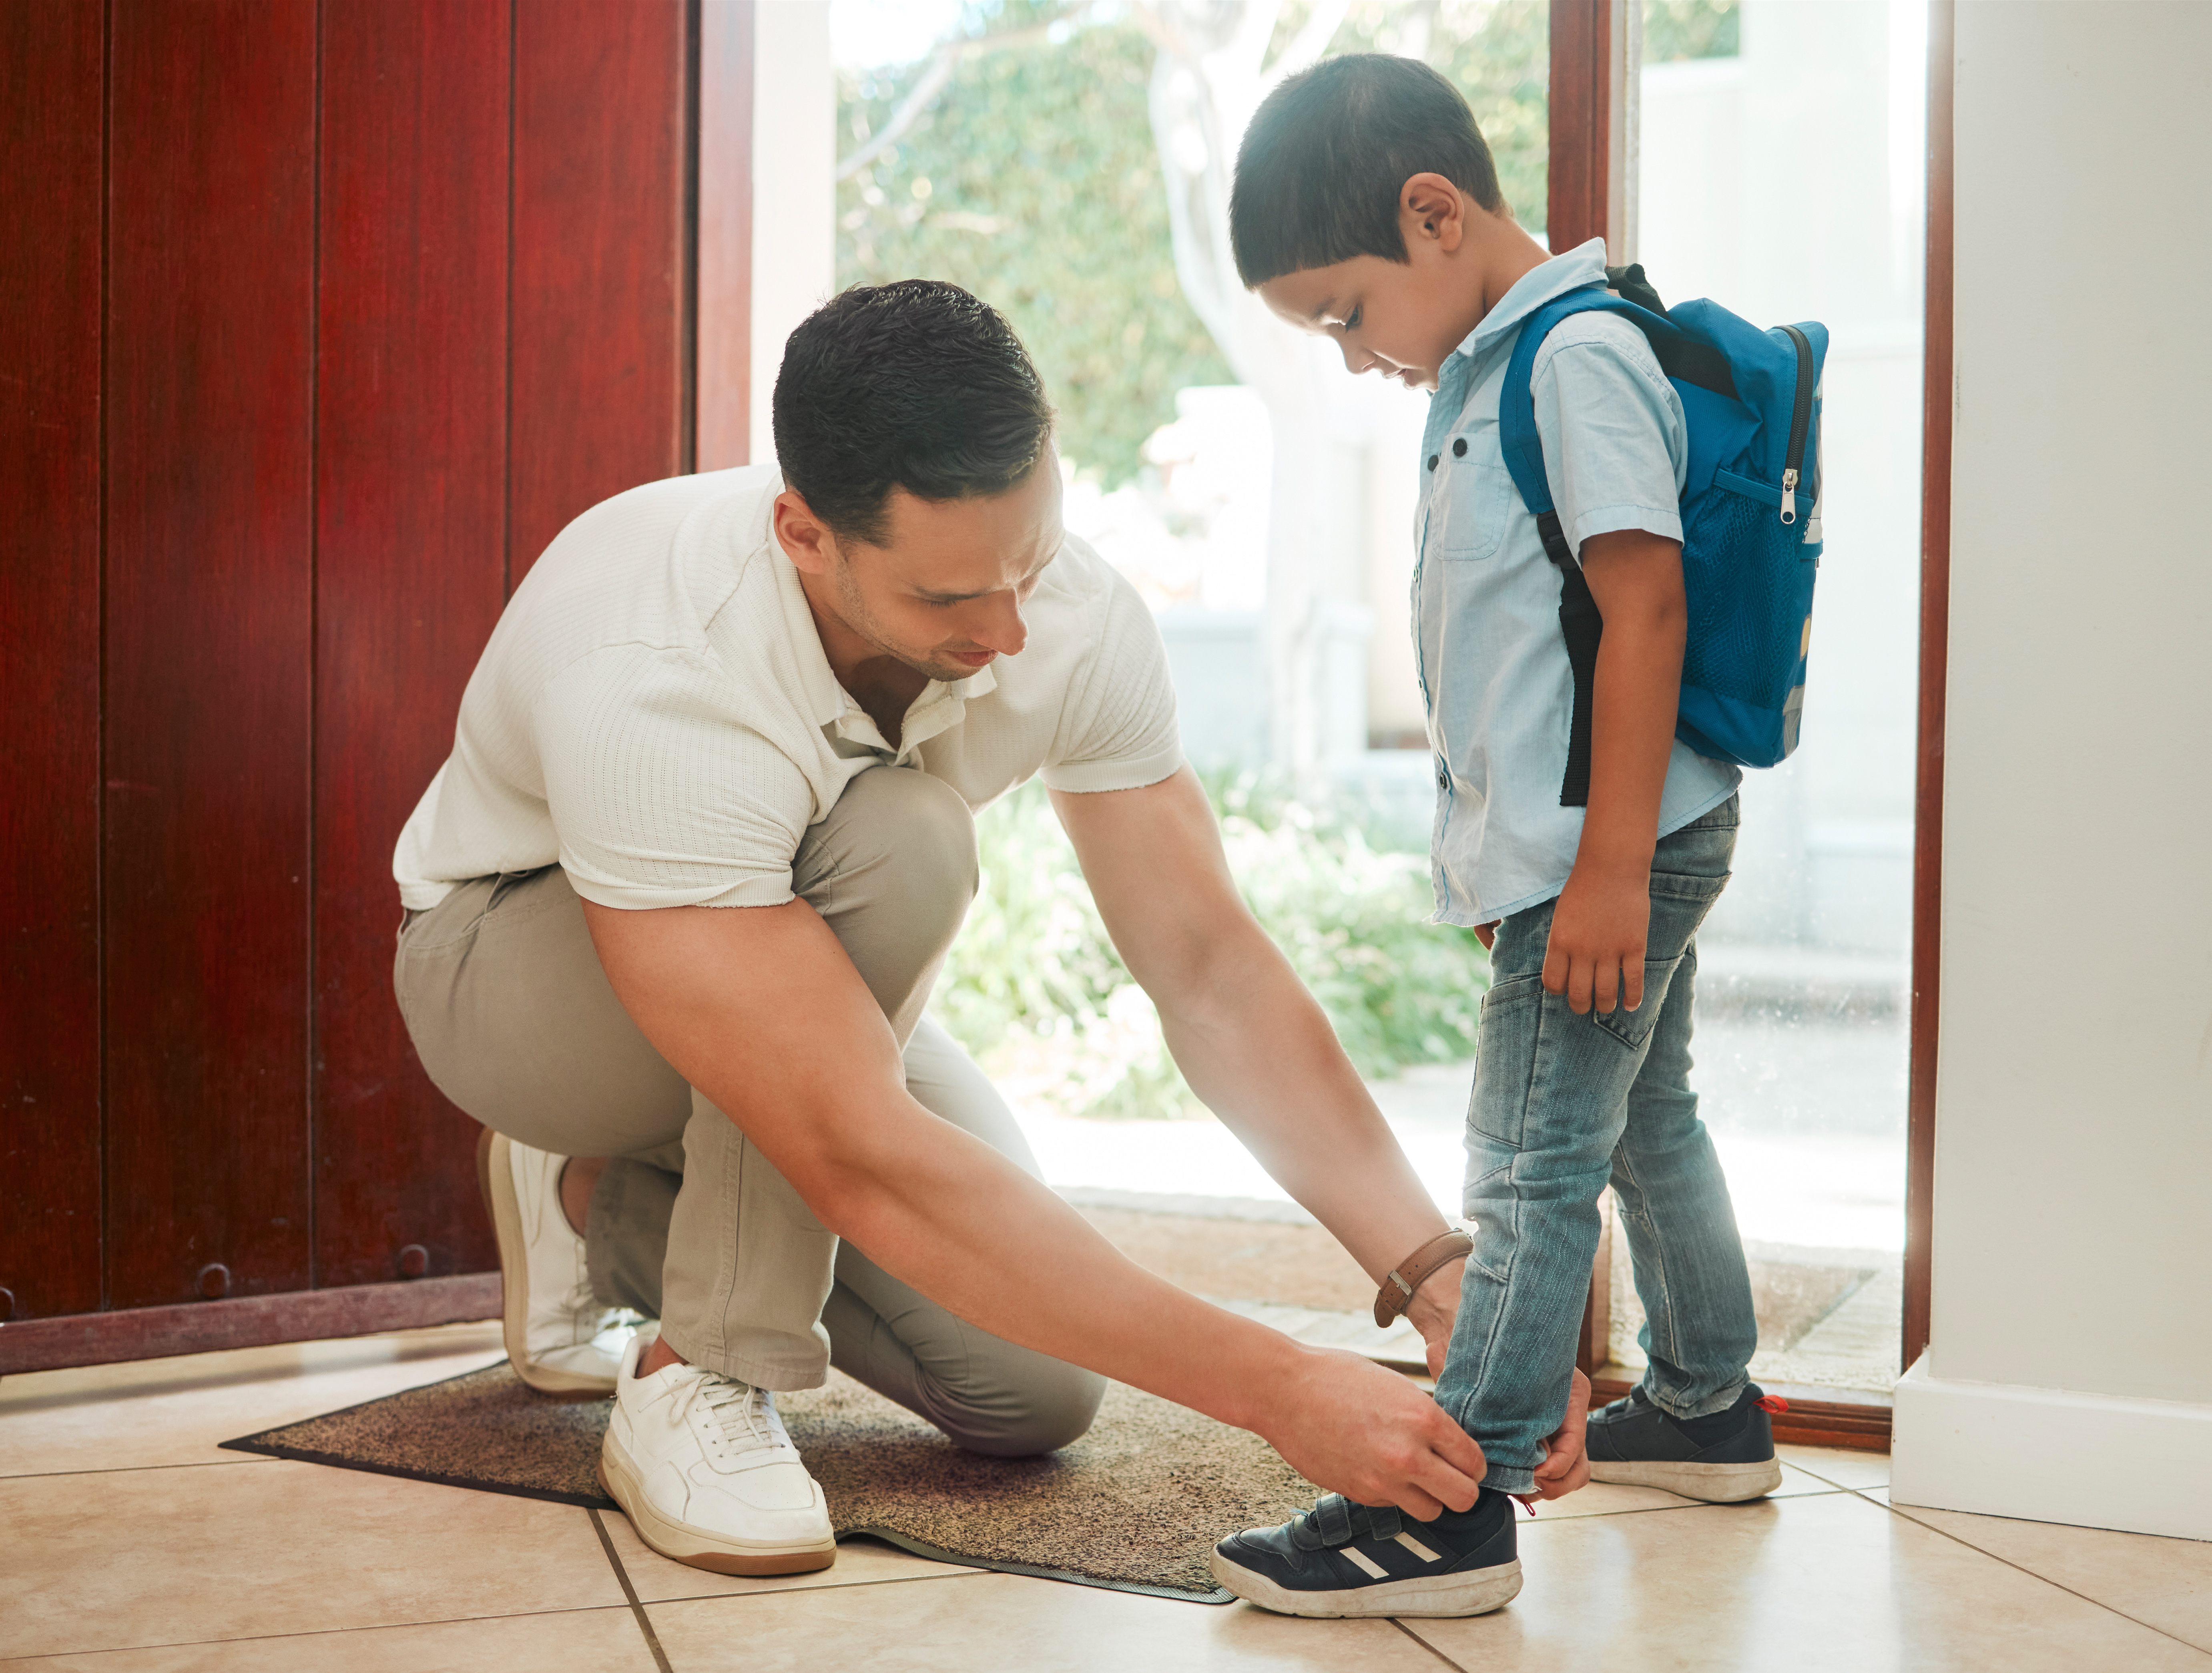 A father helps his son tie his shoe and considers estate planning and children.